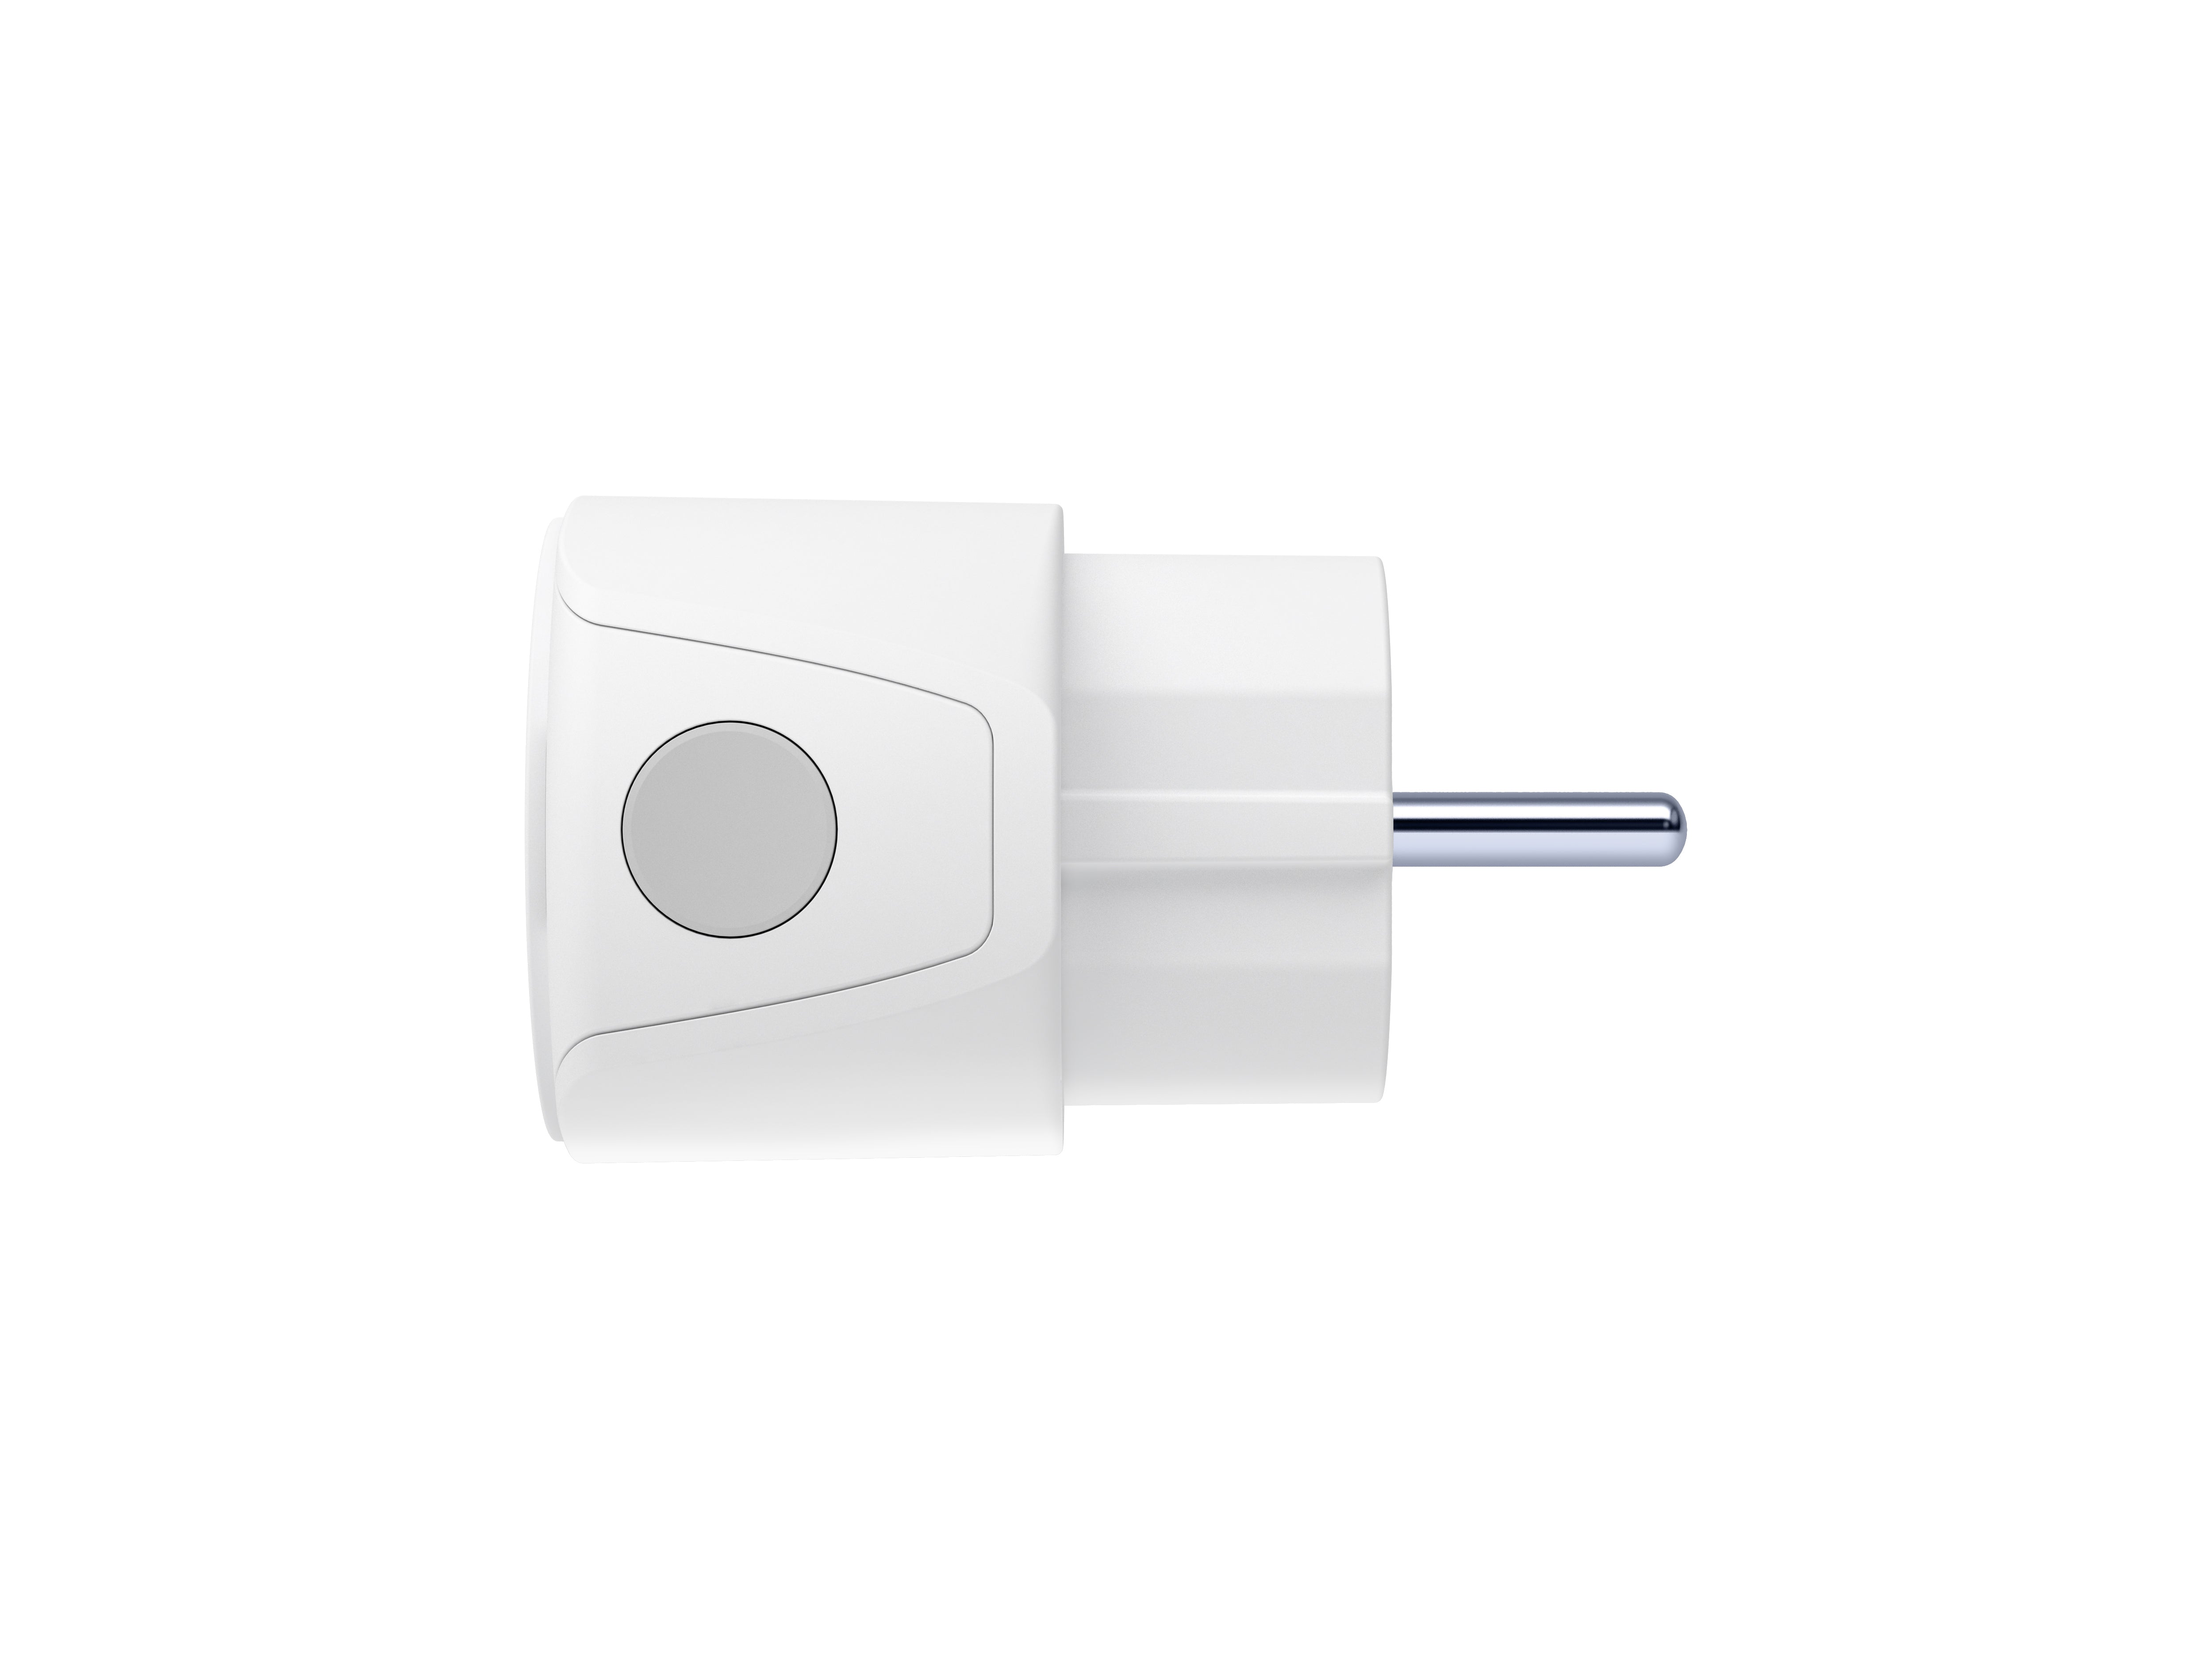 Aeotec Smart Outlet Type F WLAN